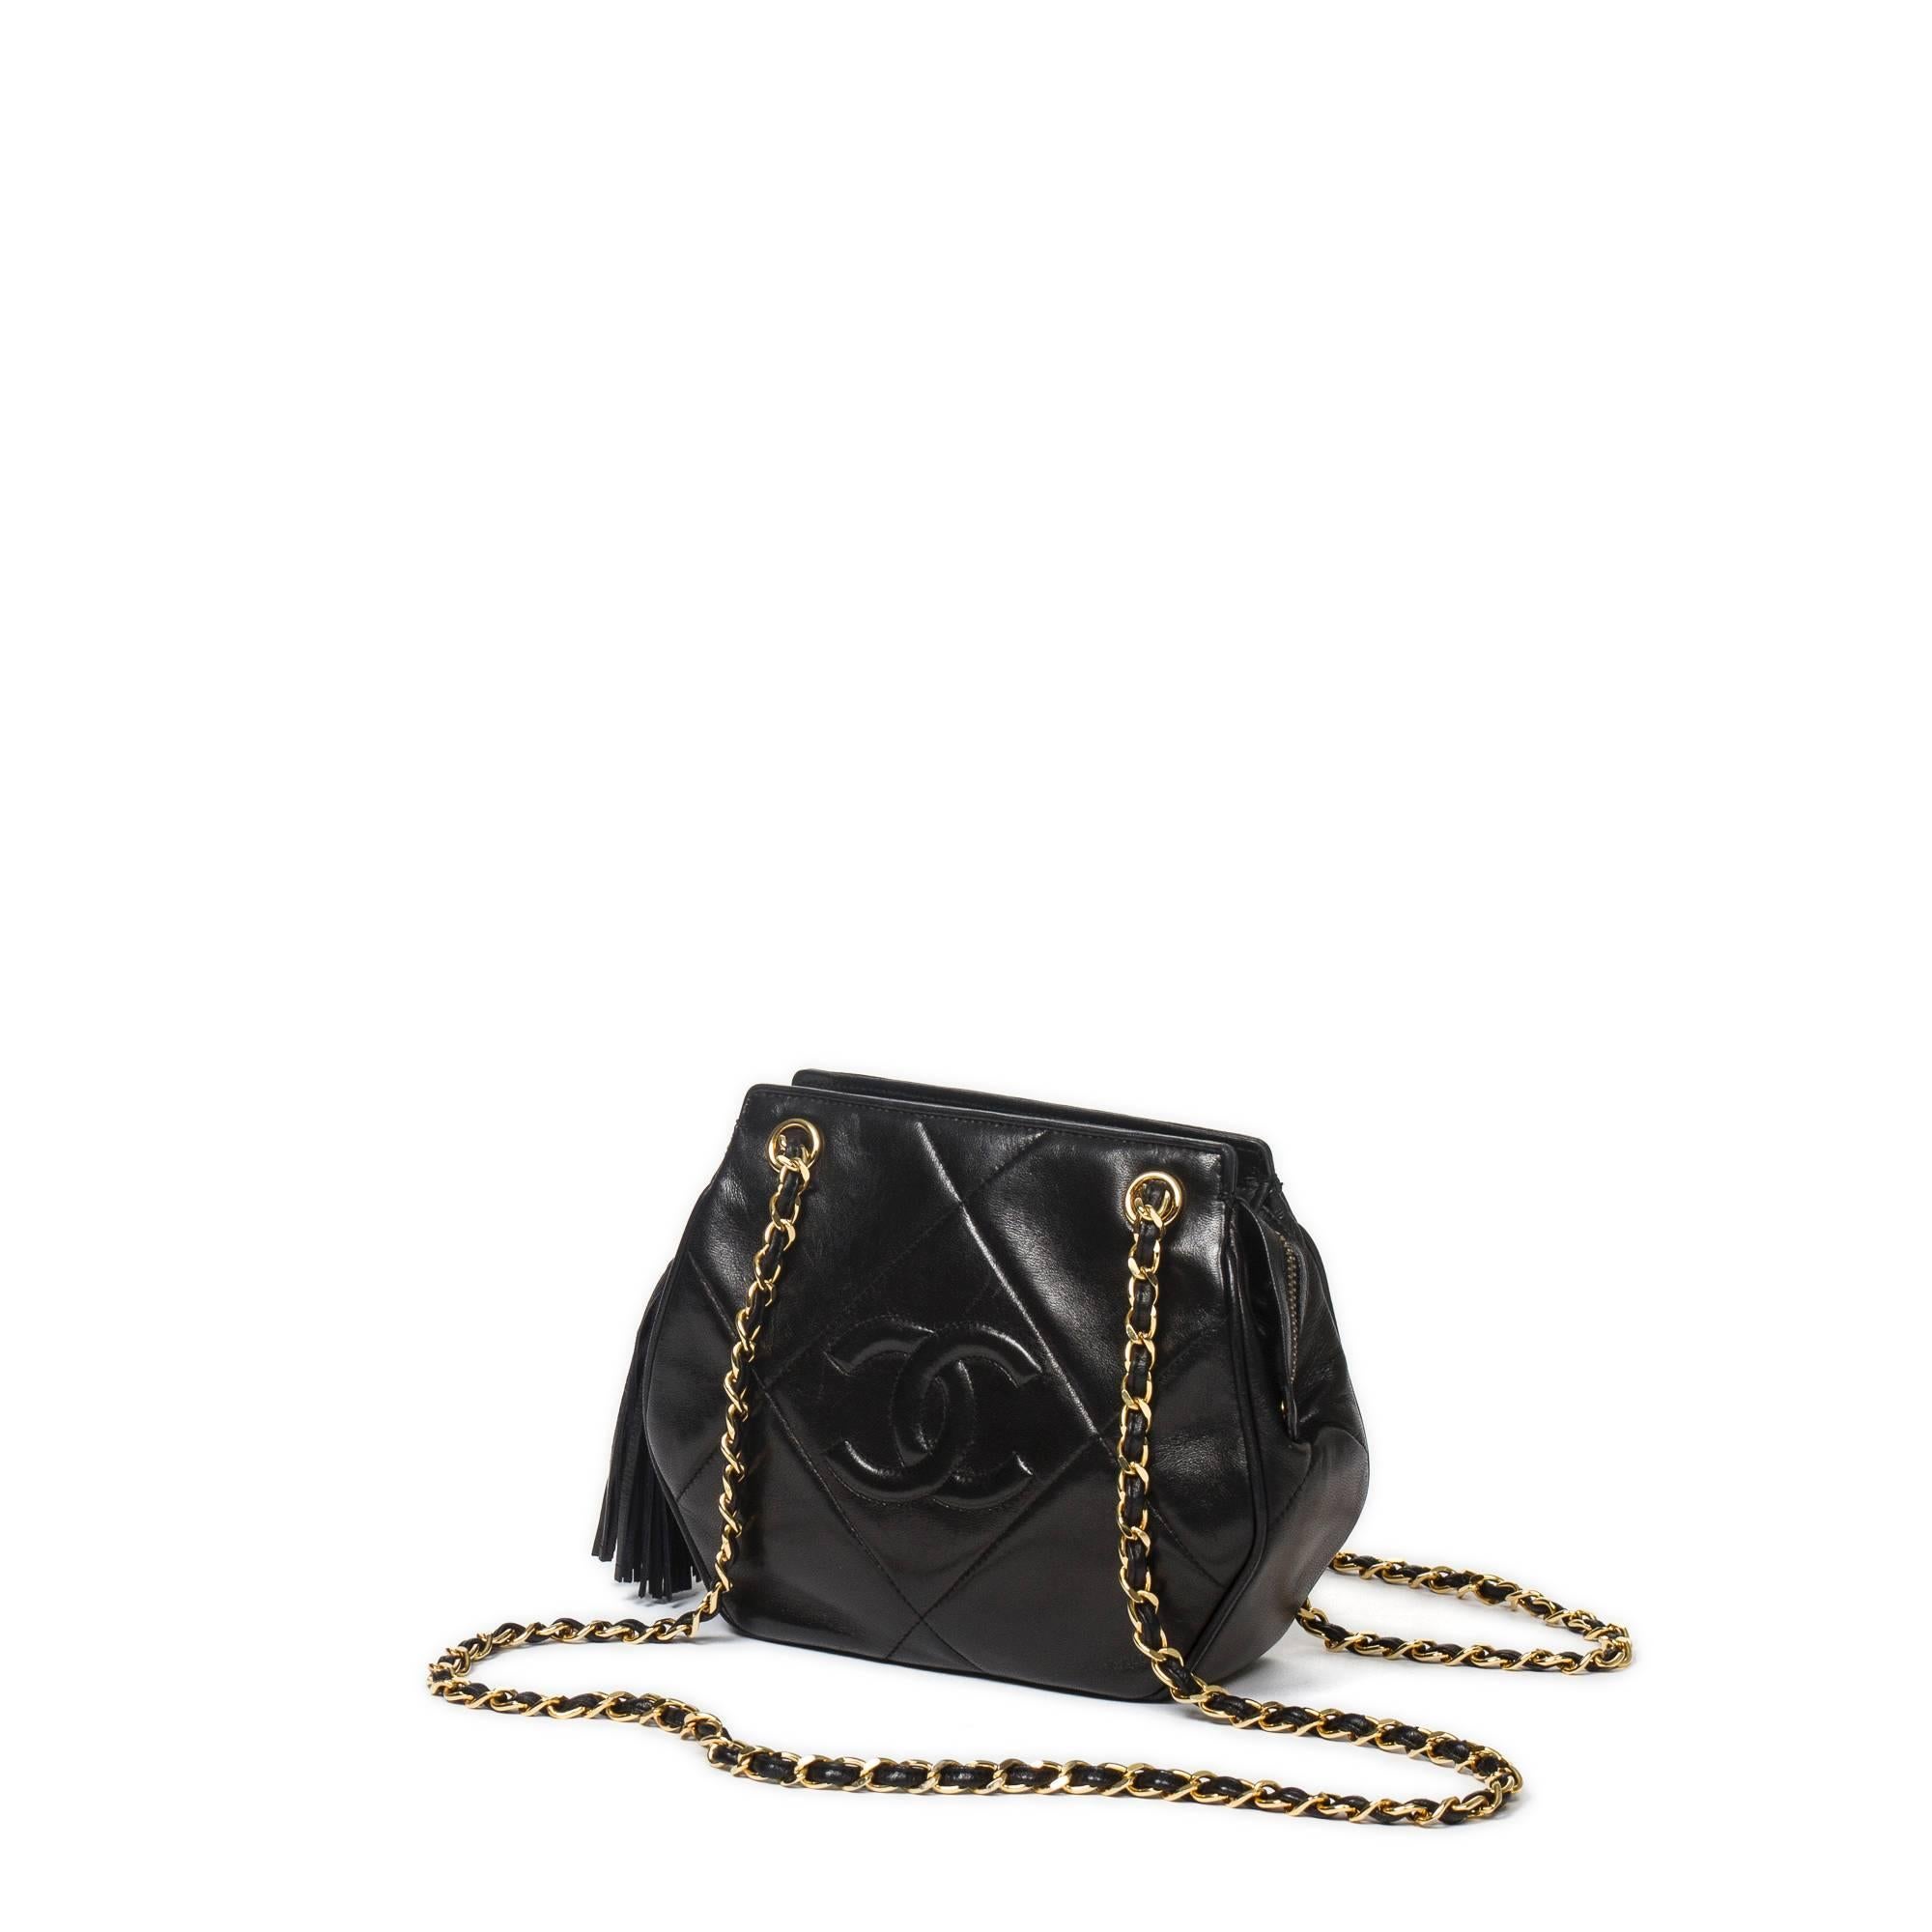 Vintage Fringe shoulder bag 21cm in black large quilted lambskin, chain straps interlaced with leather (45cm) and leather tassel zipper toggle, golden hardware. Box, dustbag, tag, authentication card included (1725574). Model from